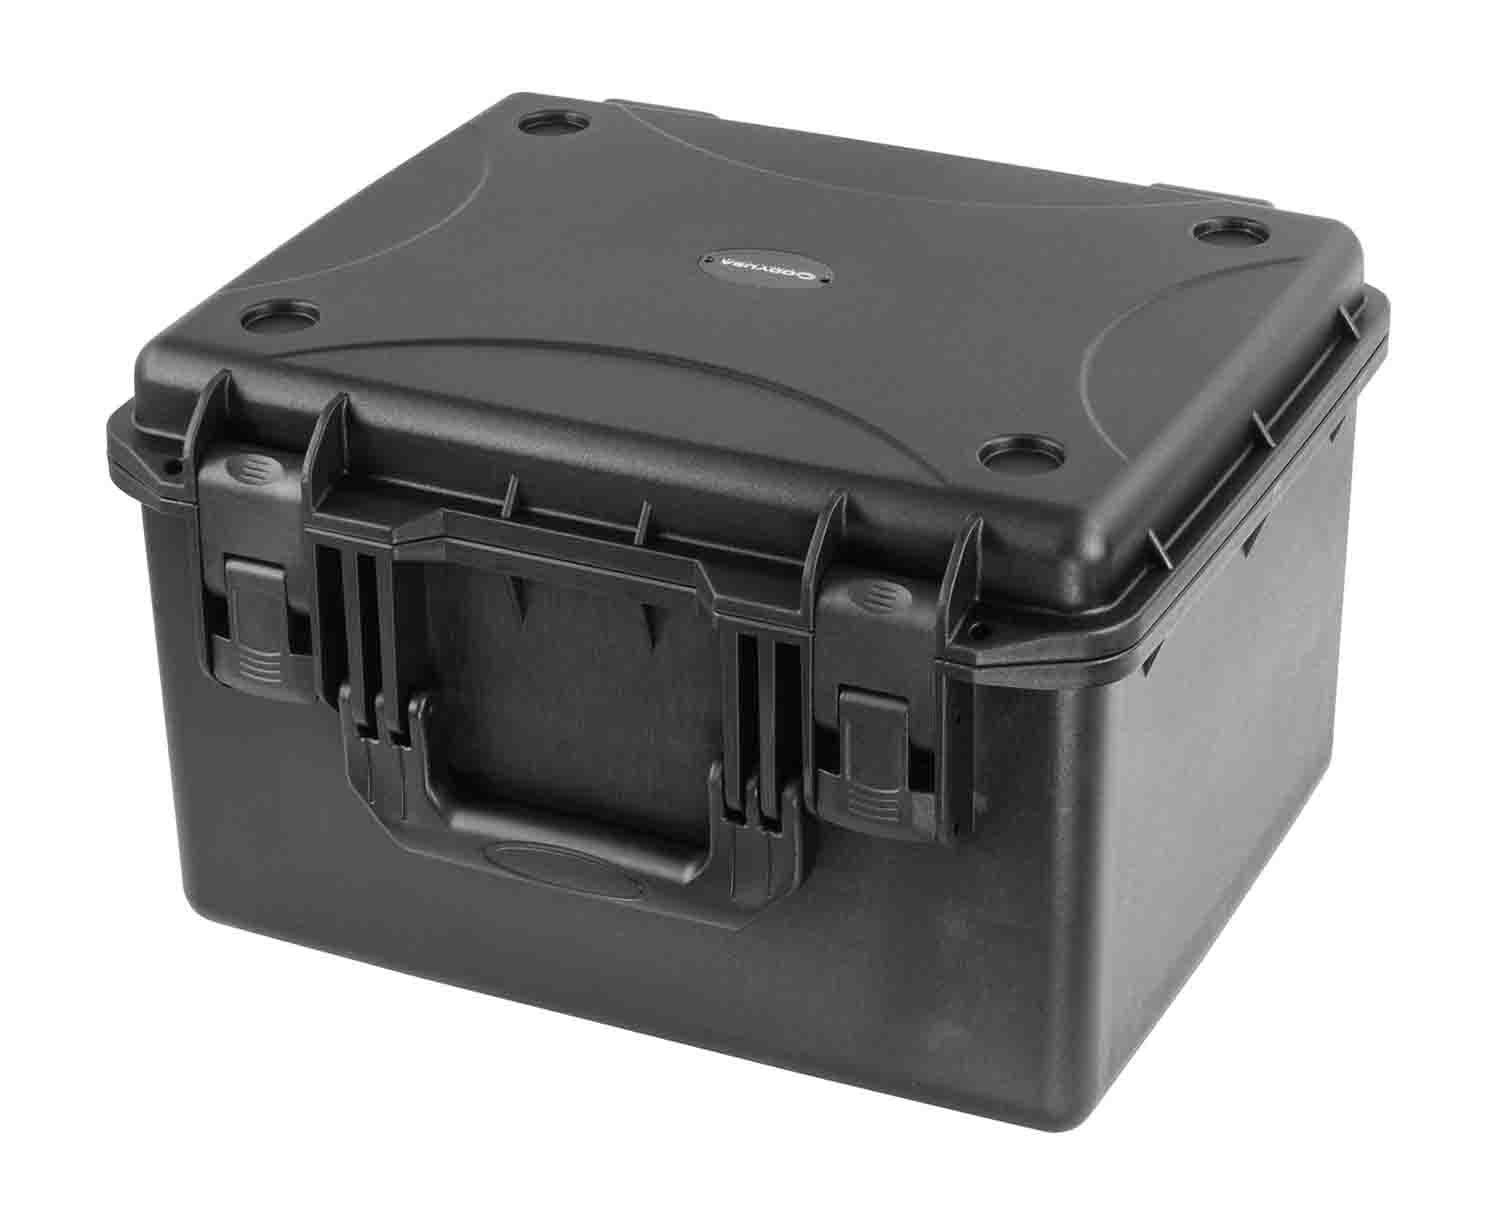 Odyssey VU161310, 17″ x 13.25″ x 8.75-Inches Bottom Interior with Pluck Foams Injection-Molded Utility Case - Hollywood DJ